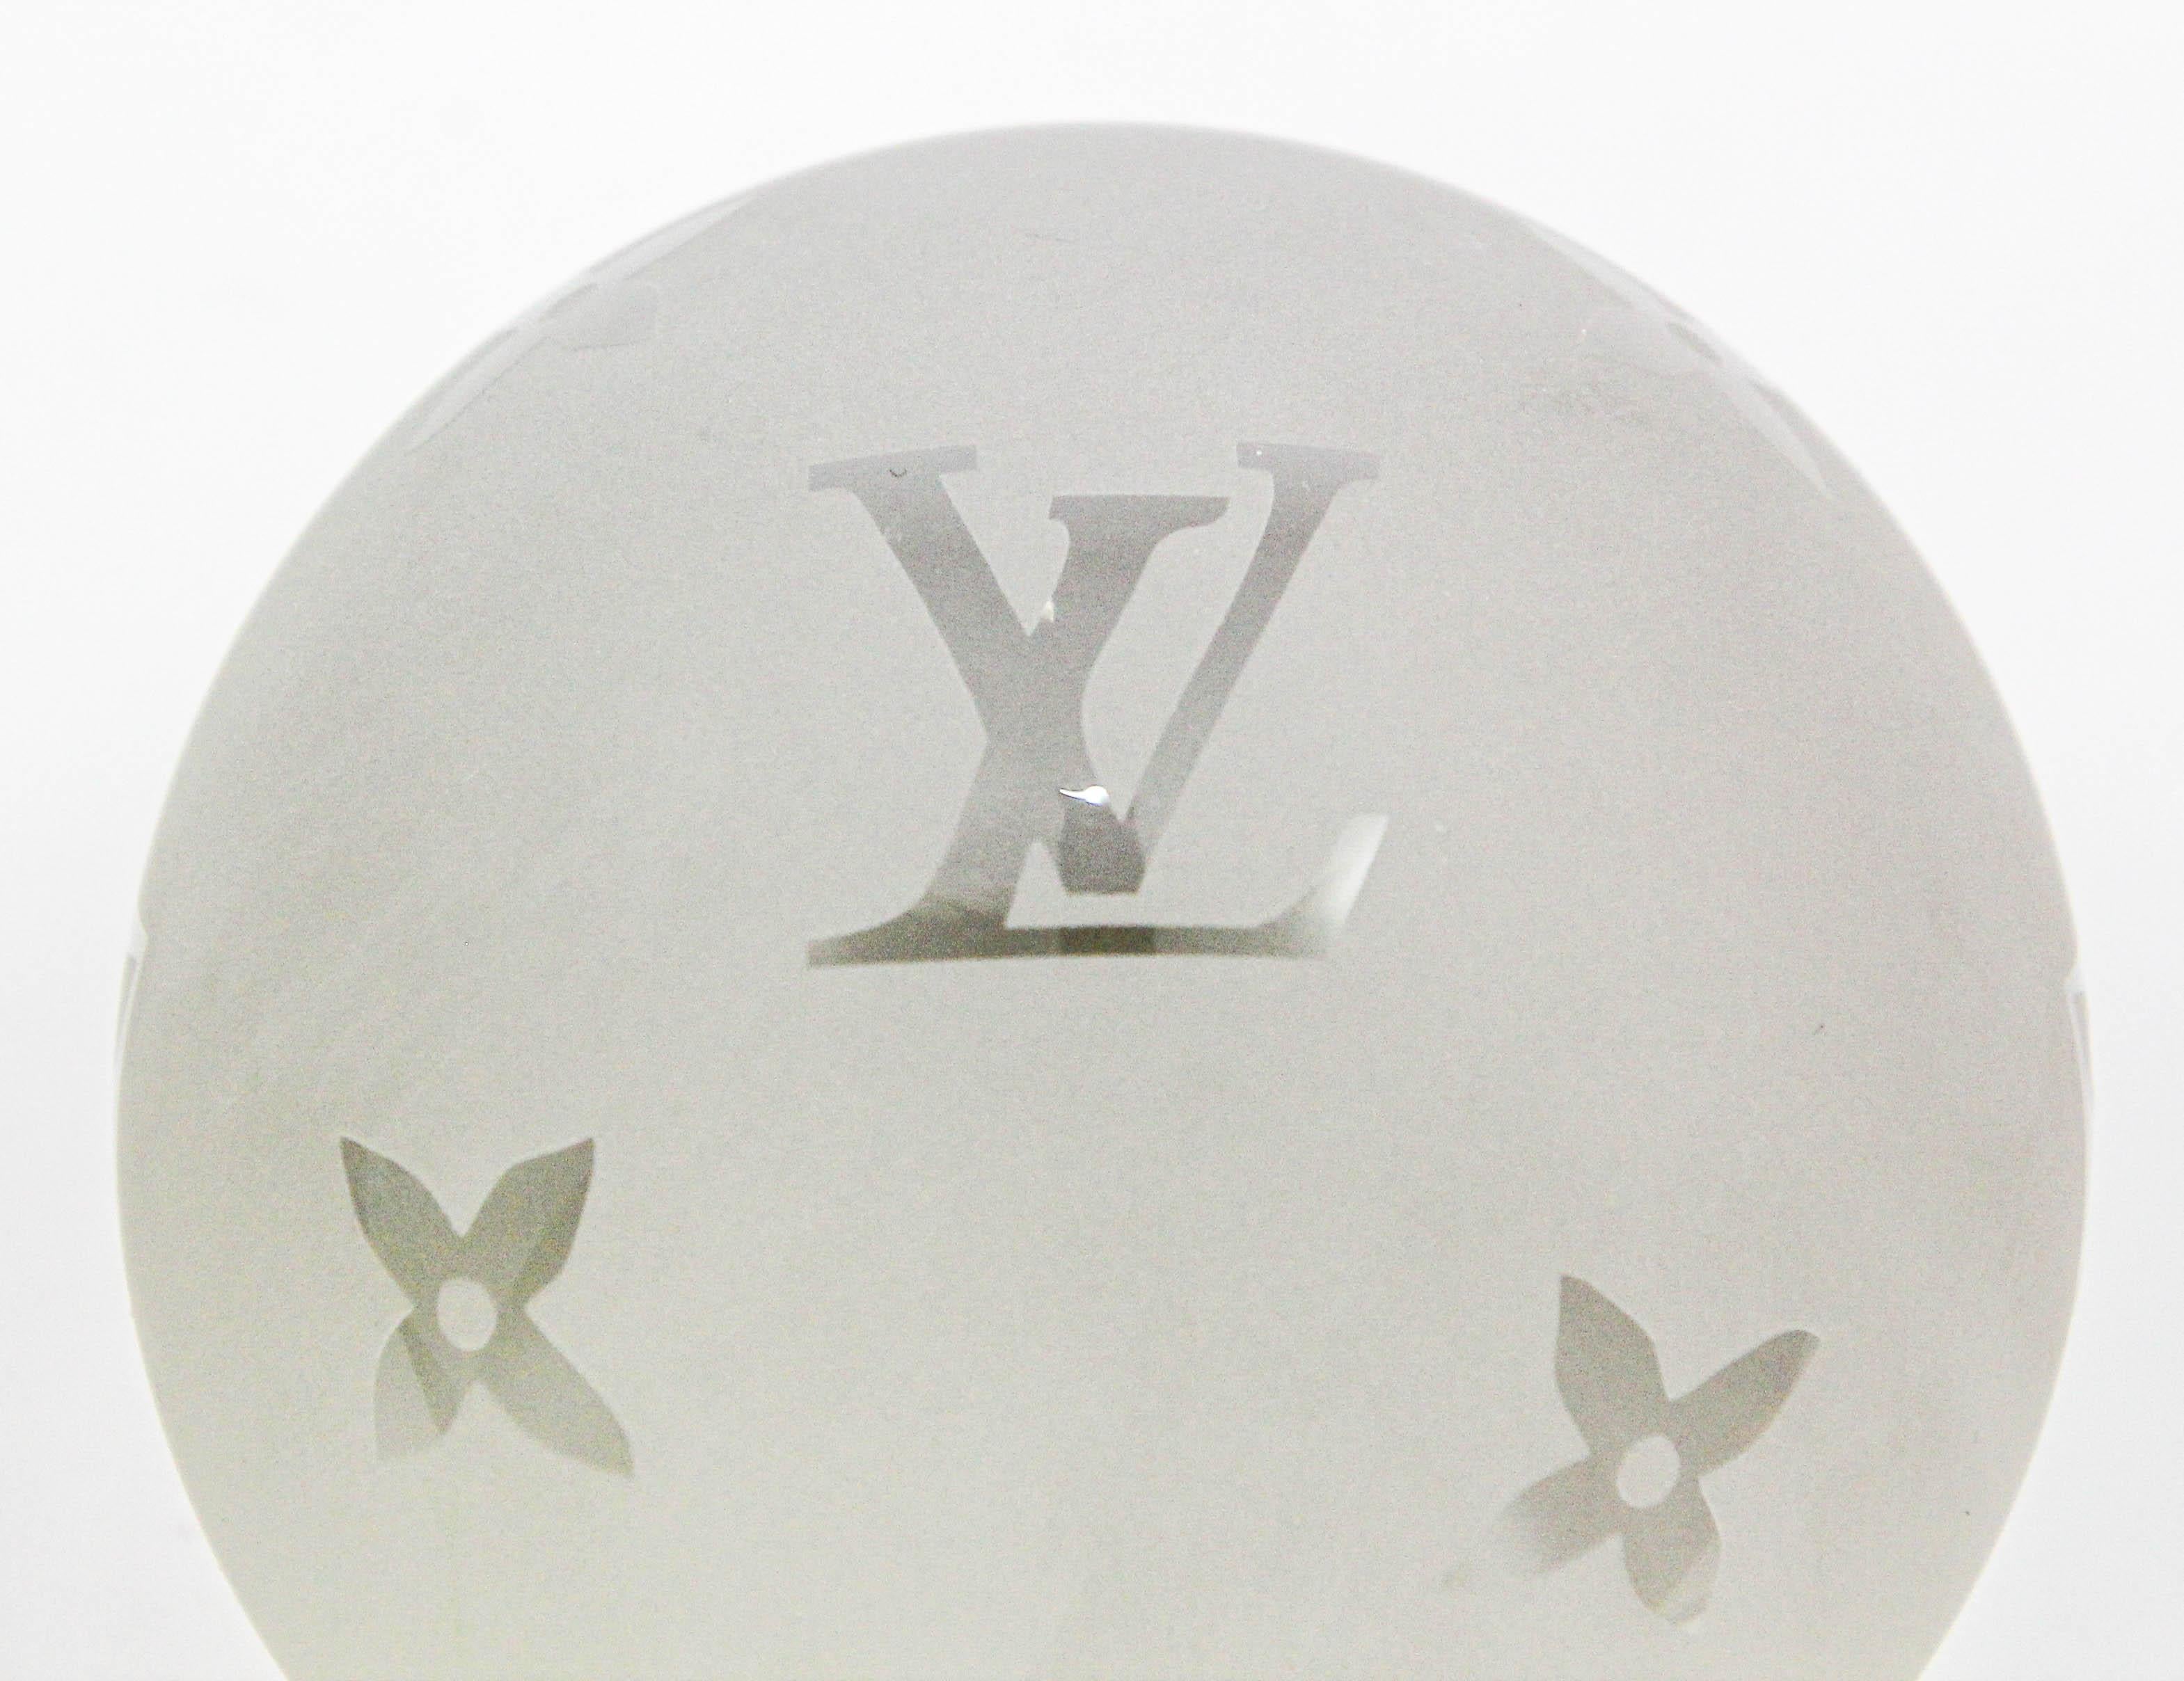 LOUIS VUITTON Paperweight Monogram Clear Crystal Paper Weight 3